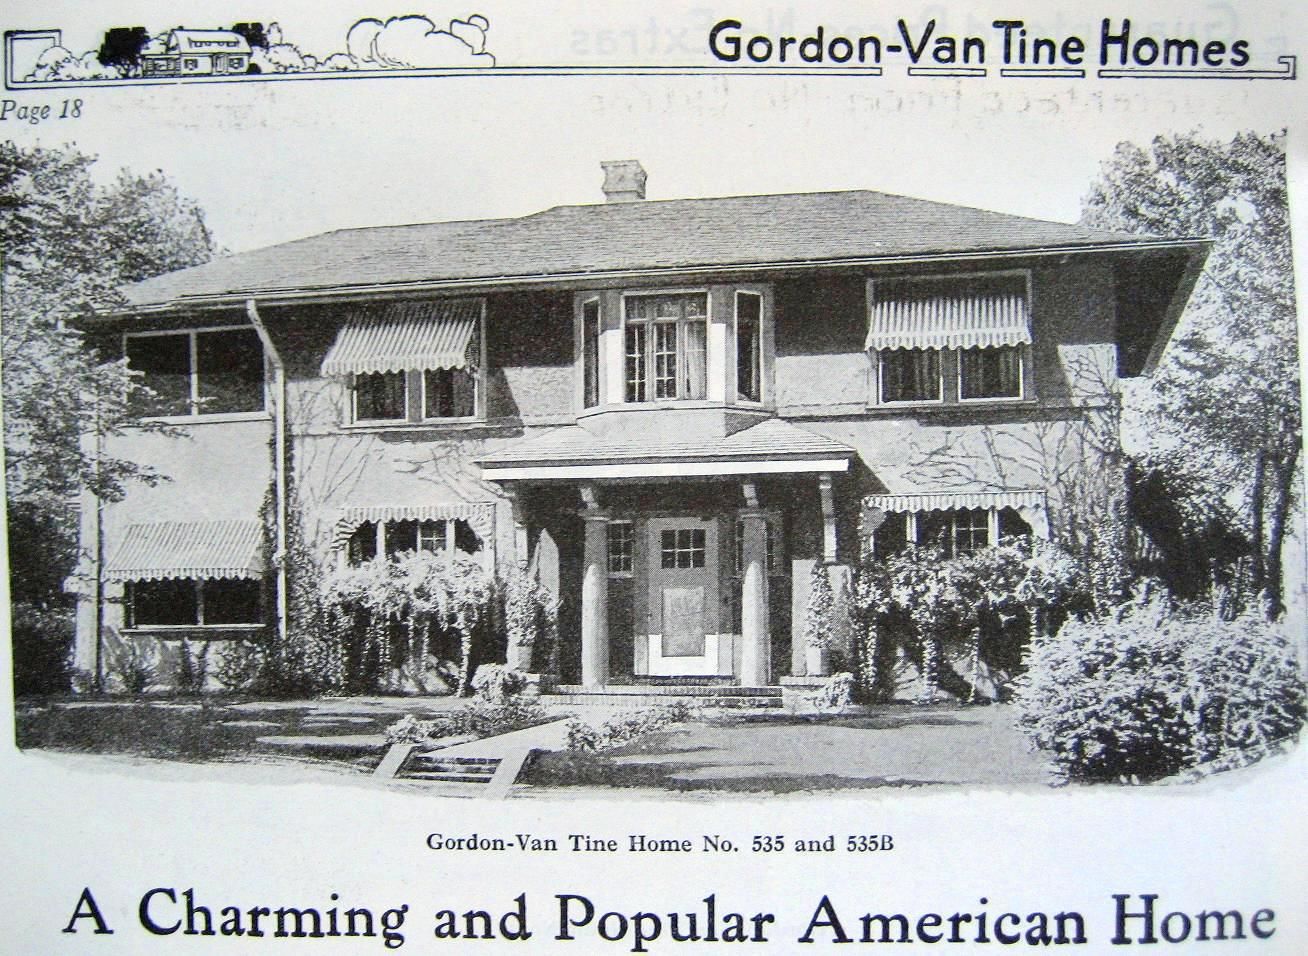 Heres a Gordon Van Tine Roberts in Carlinville. GVT was another kit home company that (like Sears) sold entire houses from a mail-order catalog. GVT was based in Davenport, Iowa.